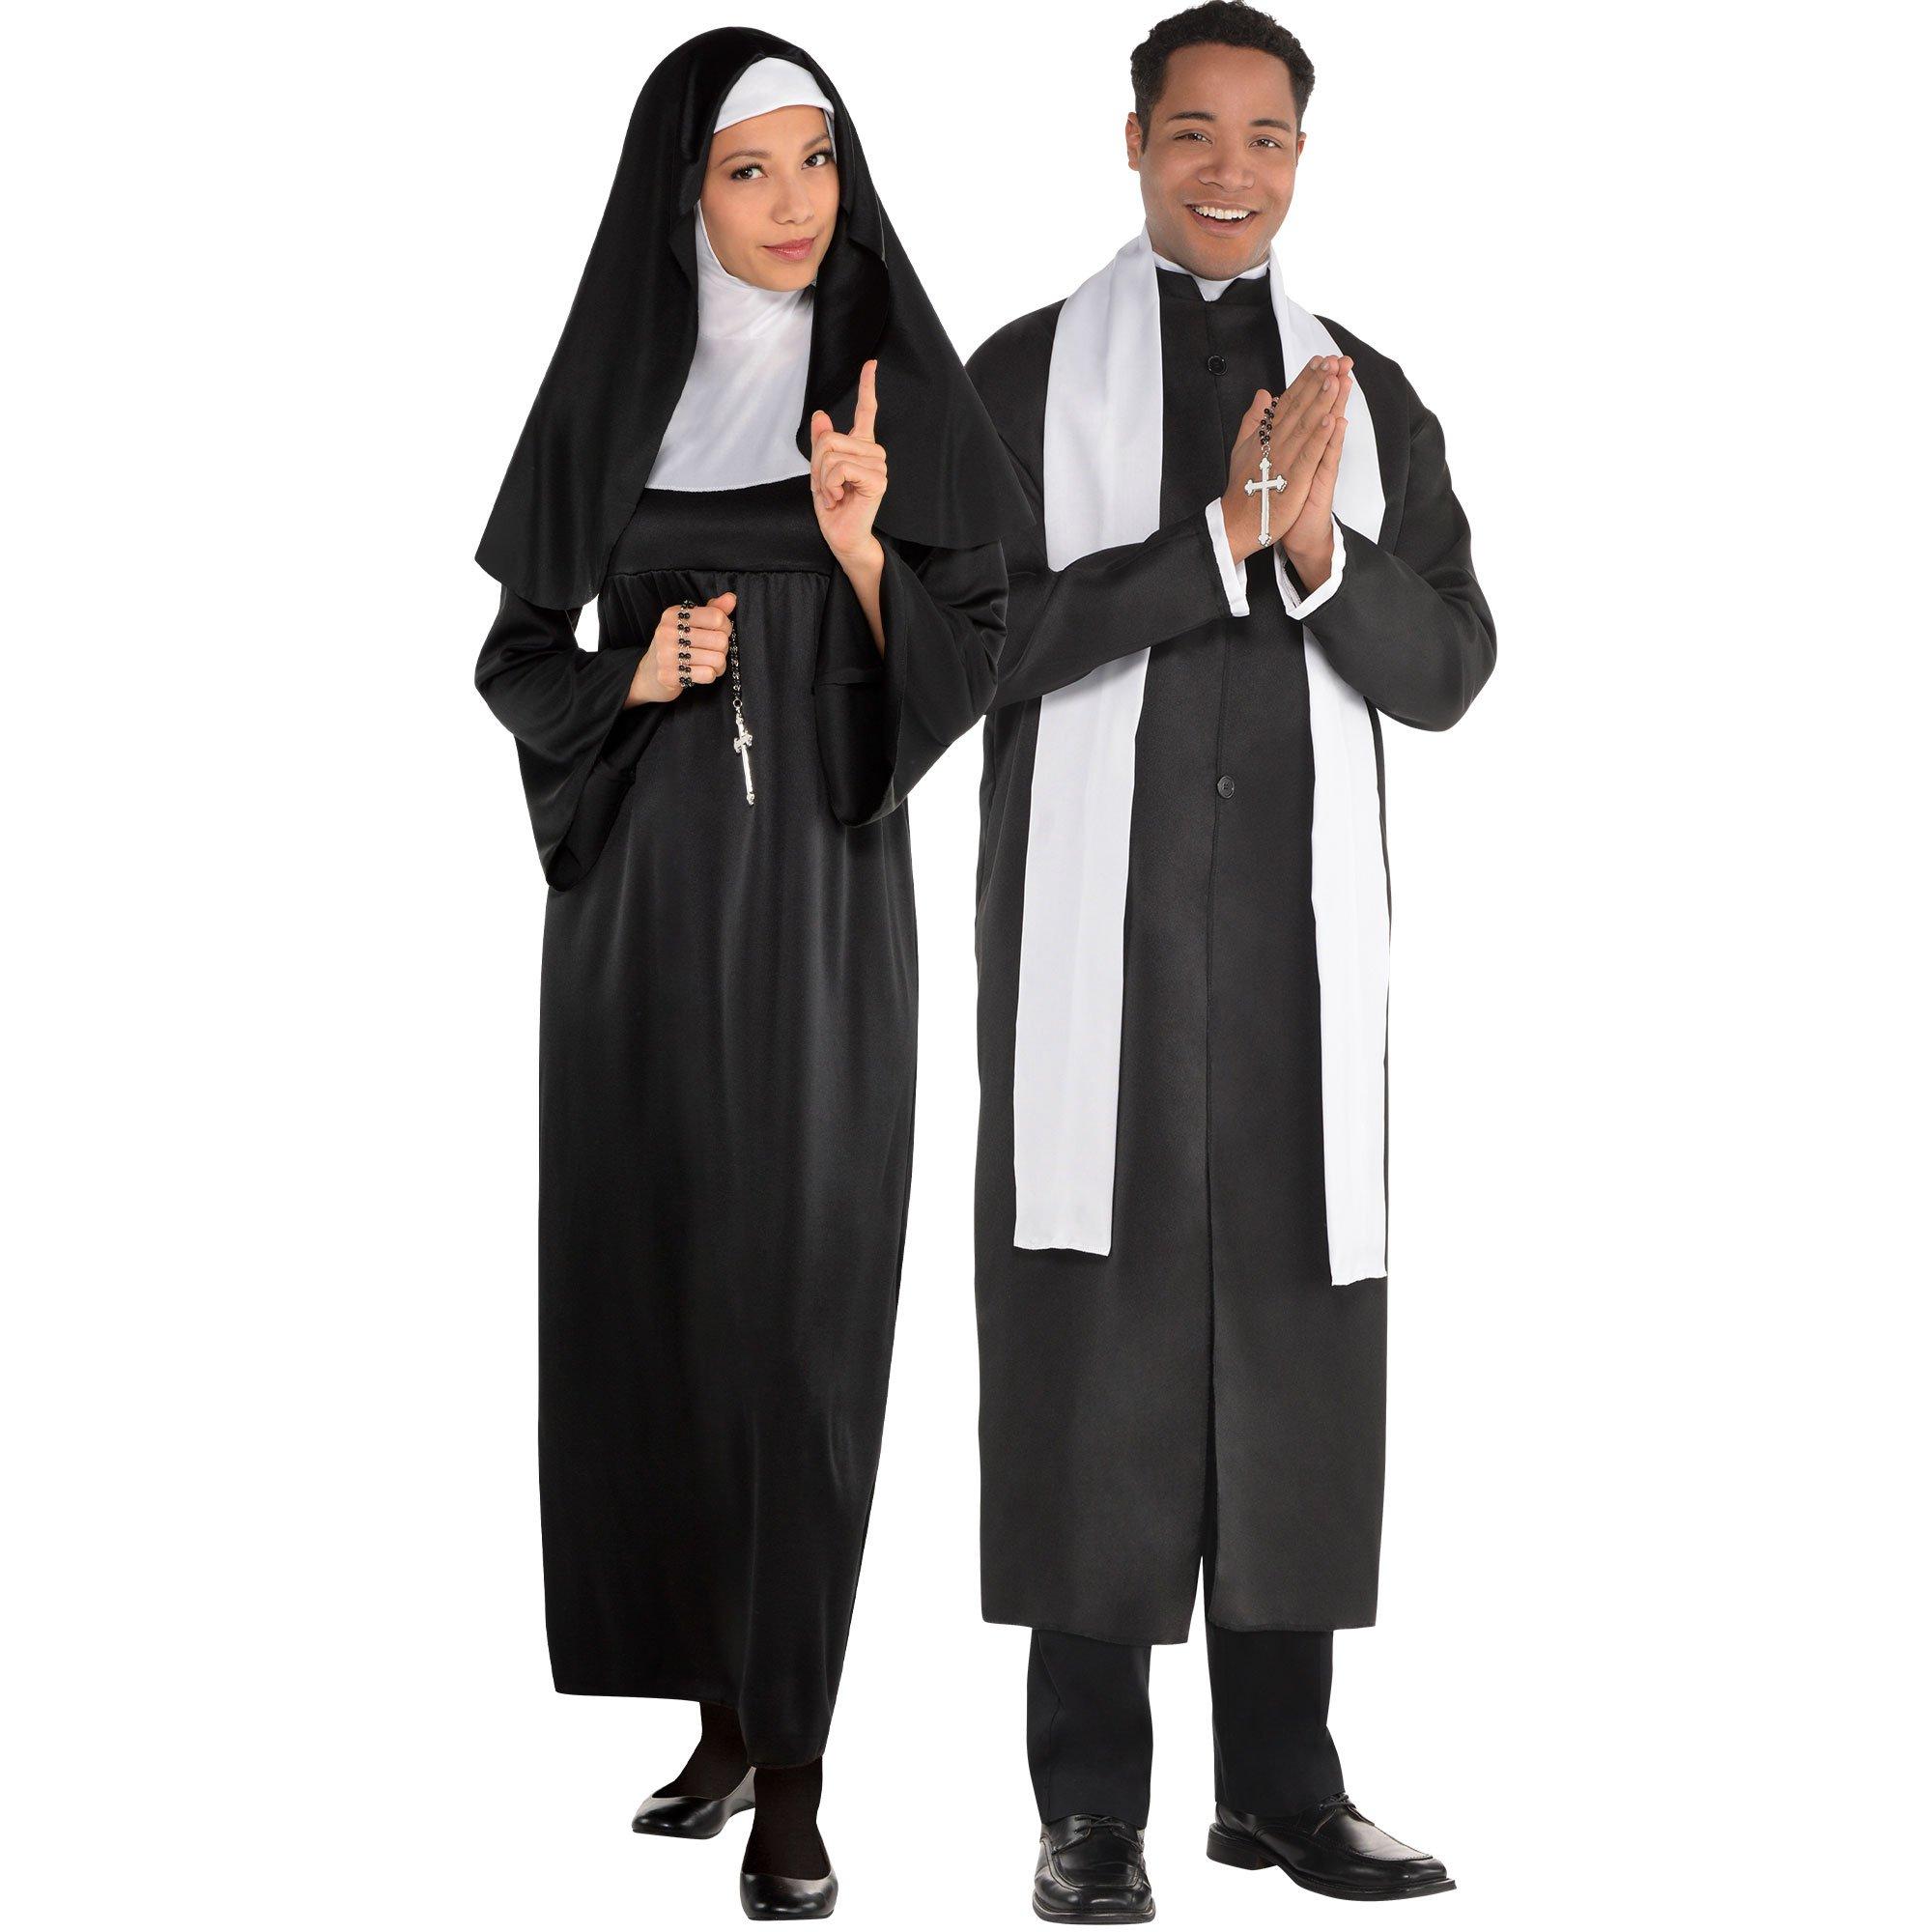 The Holy Couple Couples Costume